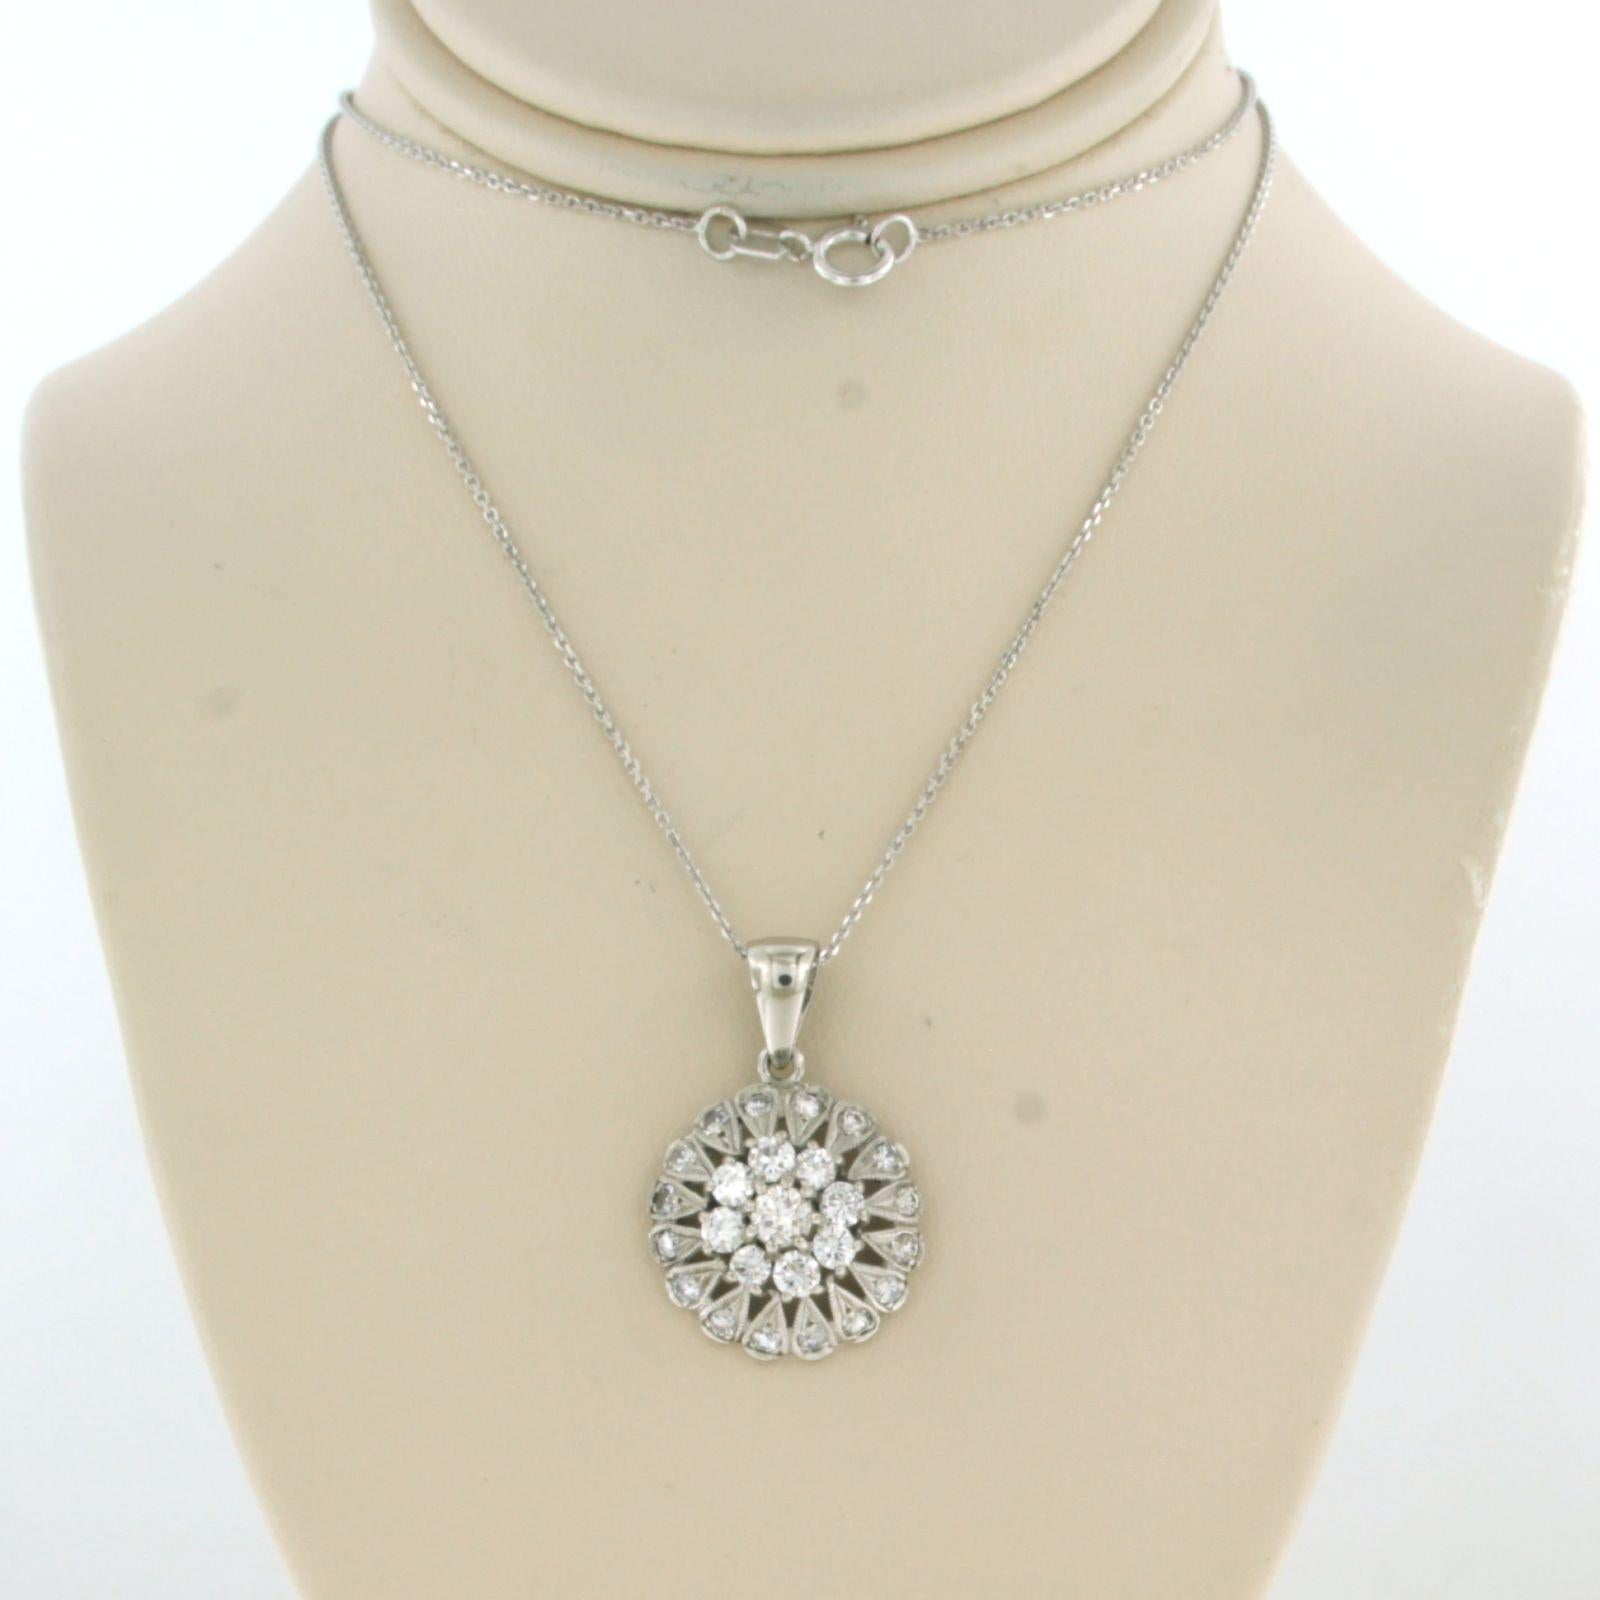 14k white gold necklace with pendant set with brilliant cut diamonds up to . 1.00ct - F/G - VS/SI - 45 cm

detailed description:

the length of the necklace is 45 cm long by 0.7 mm wide

Dimensions of the pendant are 2.5 cm long by 1.6 cm